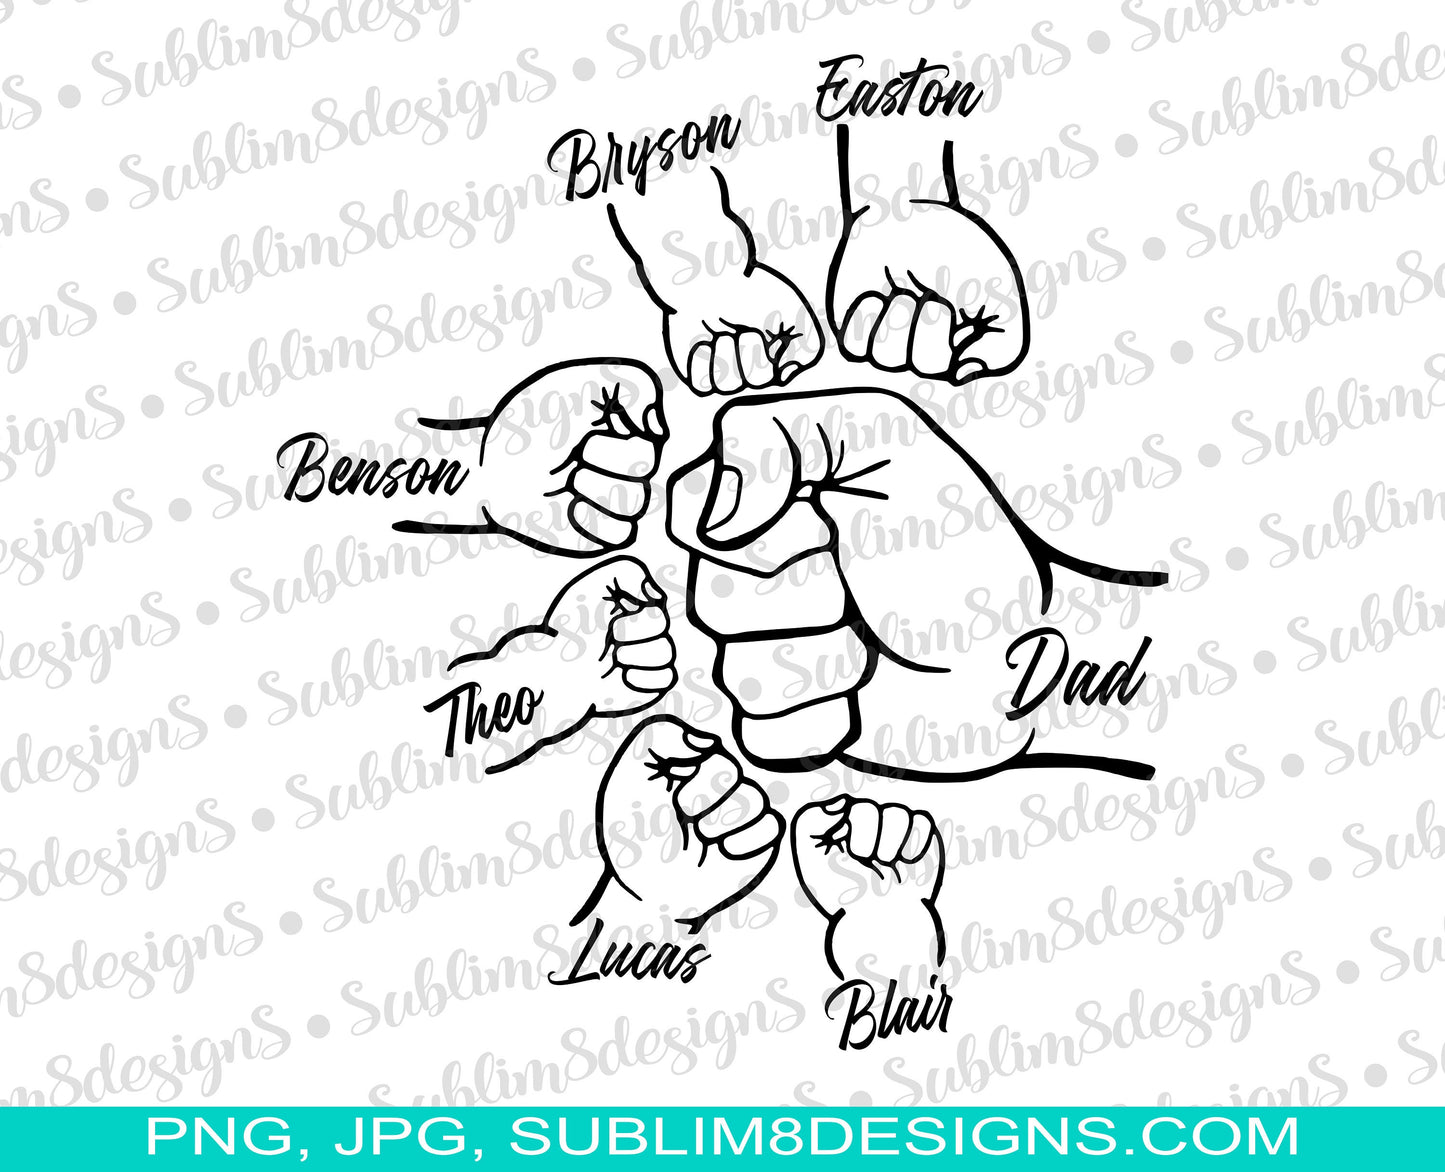 Personalized Dad Fists SVG, PNG and JPG